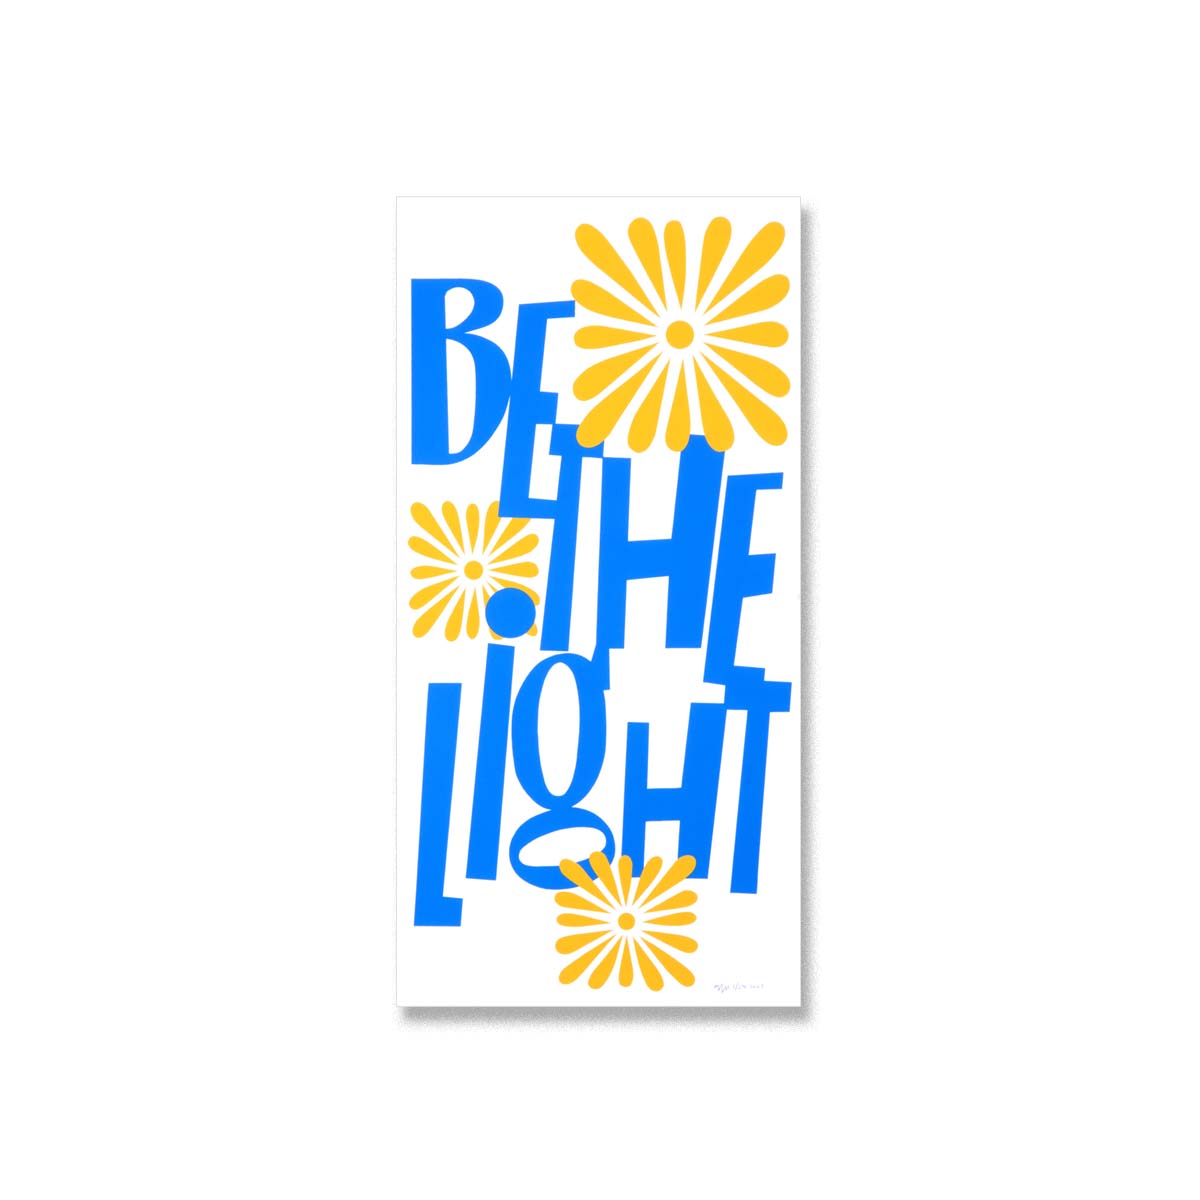 Be The Light - Limited Edition Serigraph